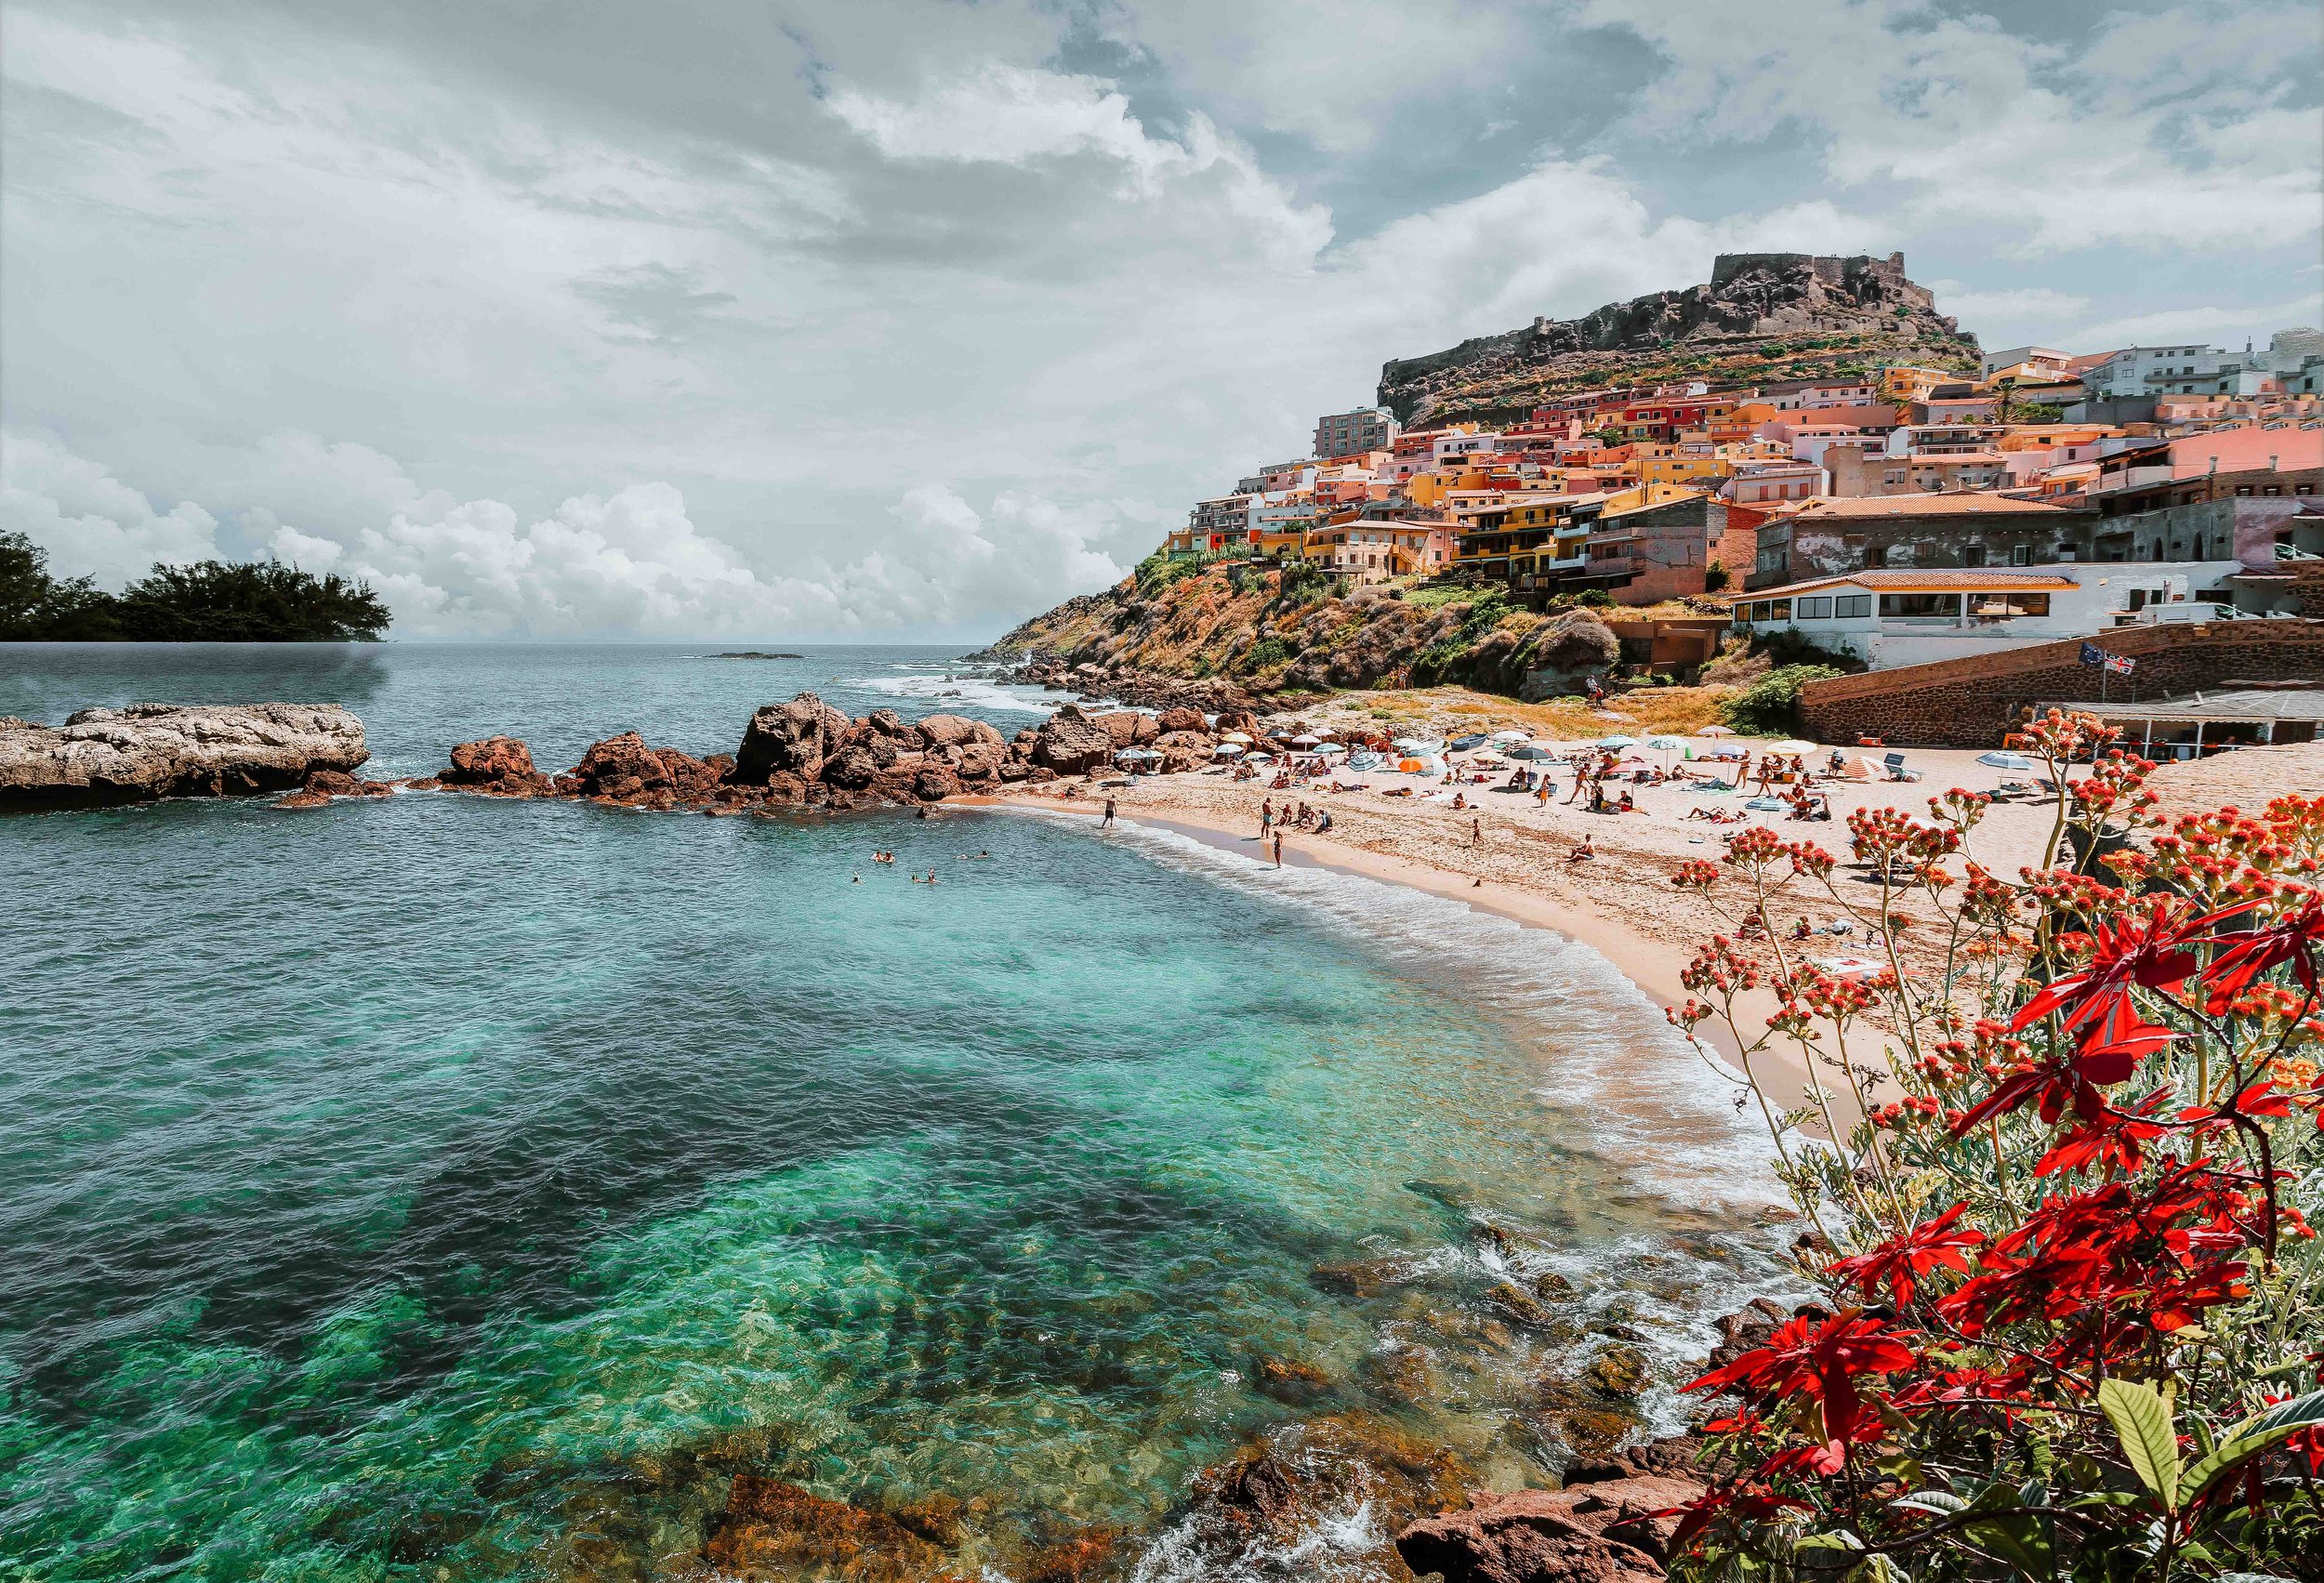 Medieval town of Castelsardo in Sardinia one of the Warmest places in Europe in April